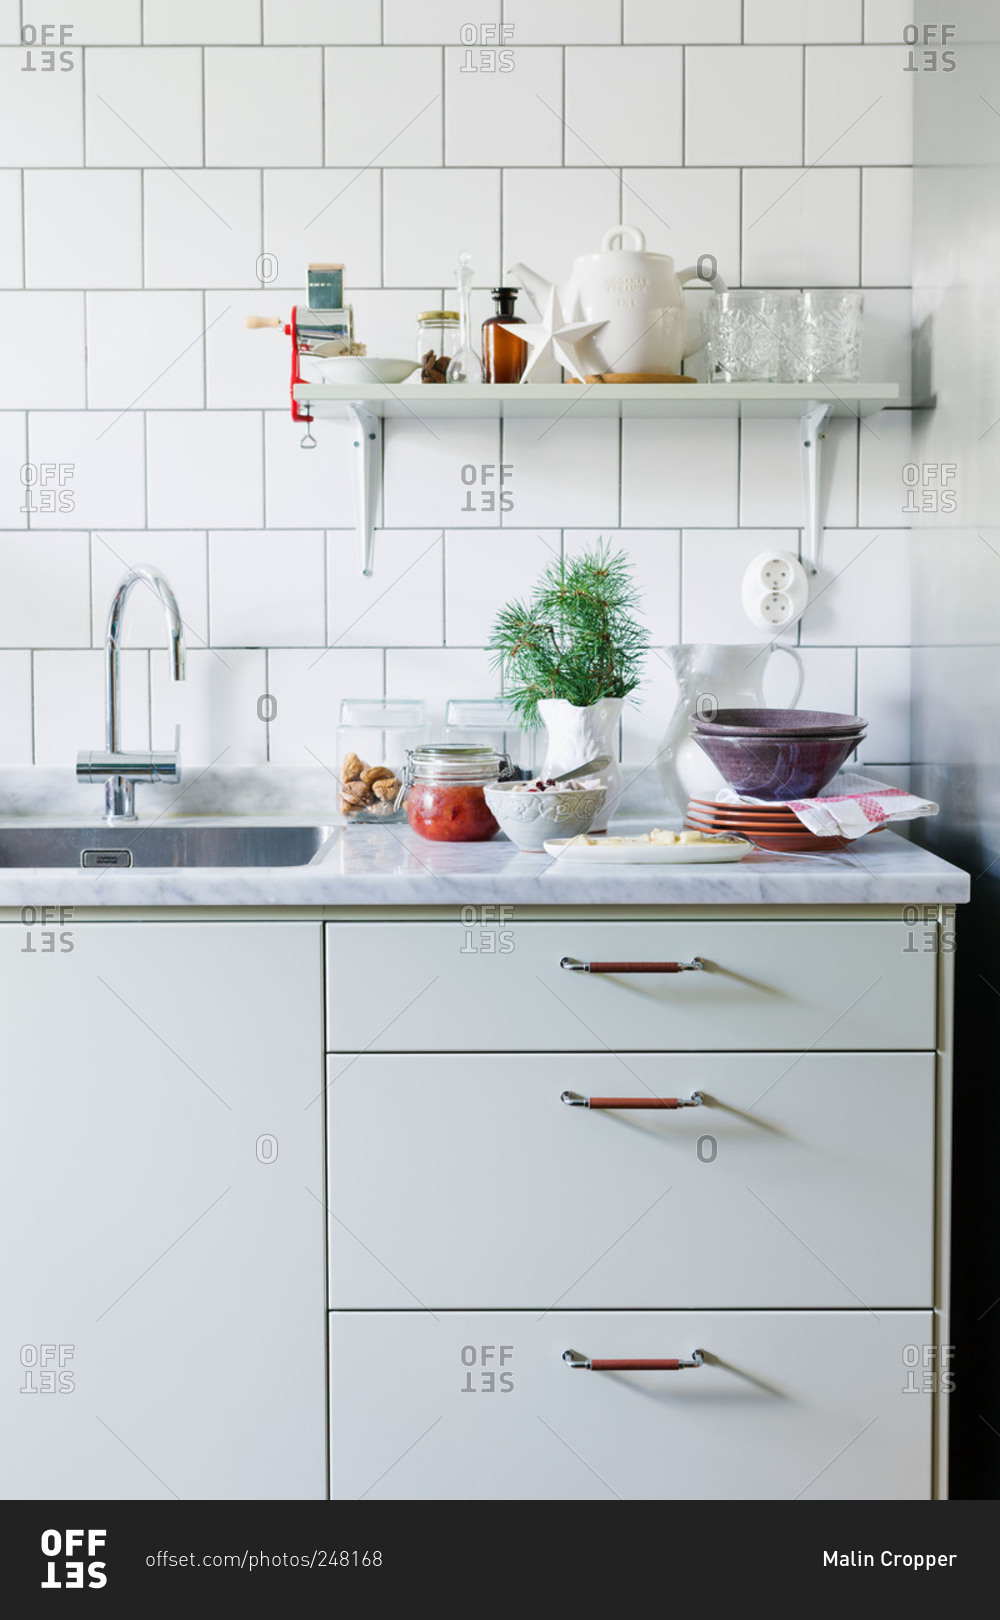 A kitchen countertop with Christmas treats in Sweden